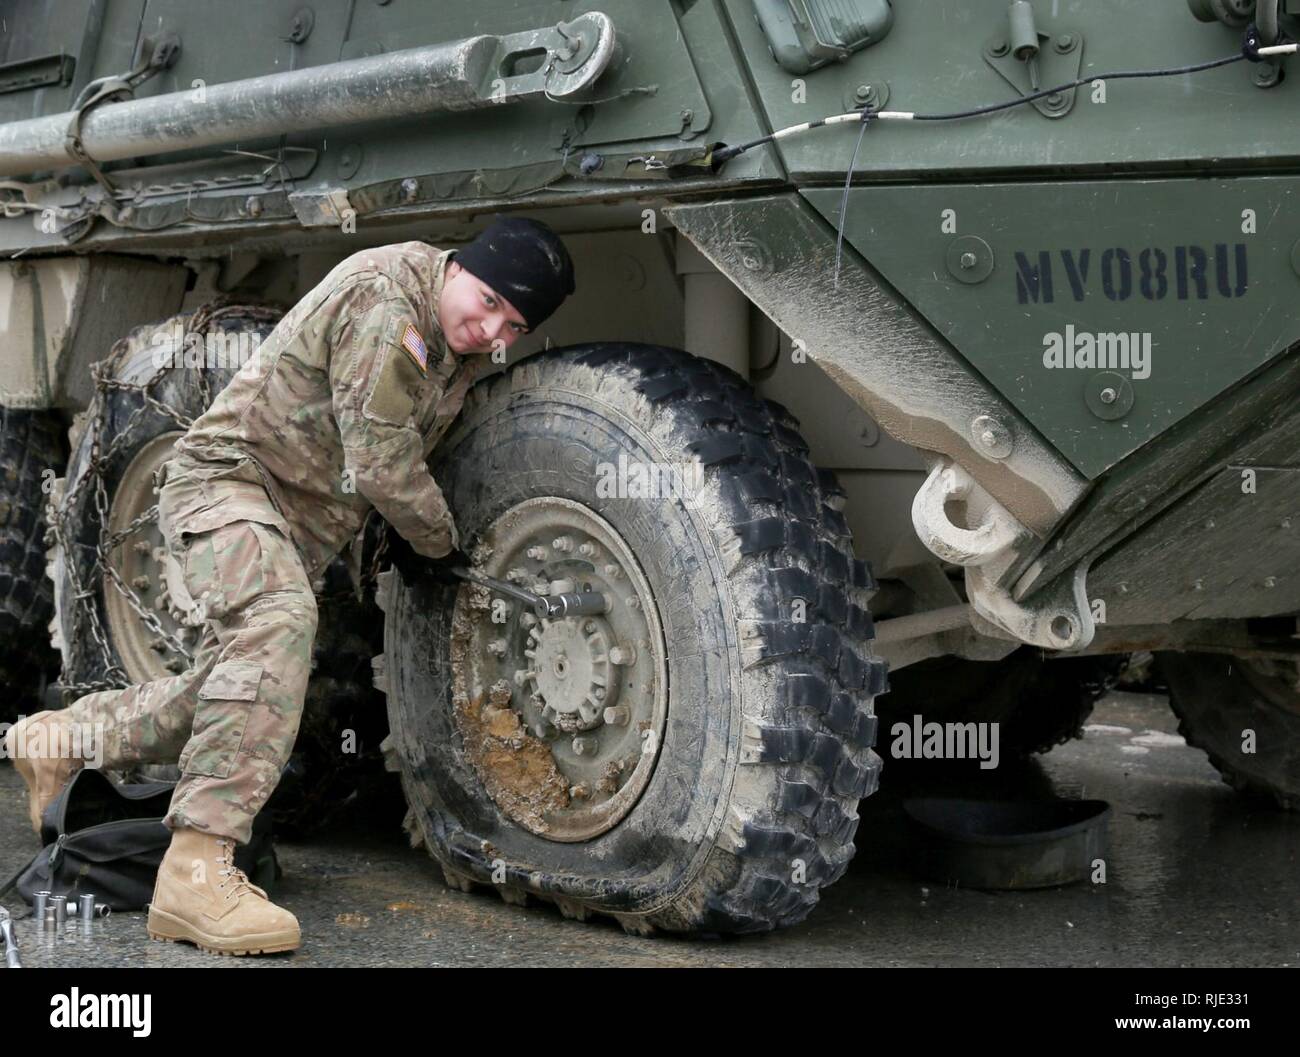 A U.S. Army Soldier from 2nd Squadron, 2nd Cavalry Regiment (2CR) performs maintenance measures on an M1126 Stryker Infantry Carrier Vehicle during Allied Spirit VIII in the Hohenfels Training Area, Hohenfels, Germany, Jan. 20, 2018. Allied Spirit VIII includes approximately 4,100 participants from 10 nations at 7th Army Training Command's Hohenfels training Area, Jan. 15-Feb. 5, 2018. Allied Spirit is a U.S. Army Europe-directed multinational exercise series designed to develop and enhance NATO and key partner's interoperability and readiness. Stock Photo